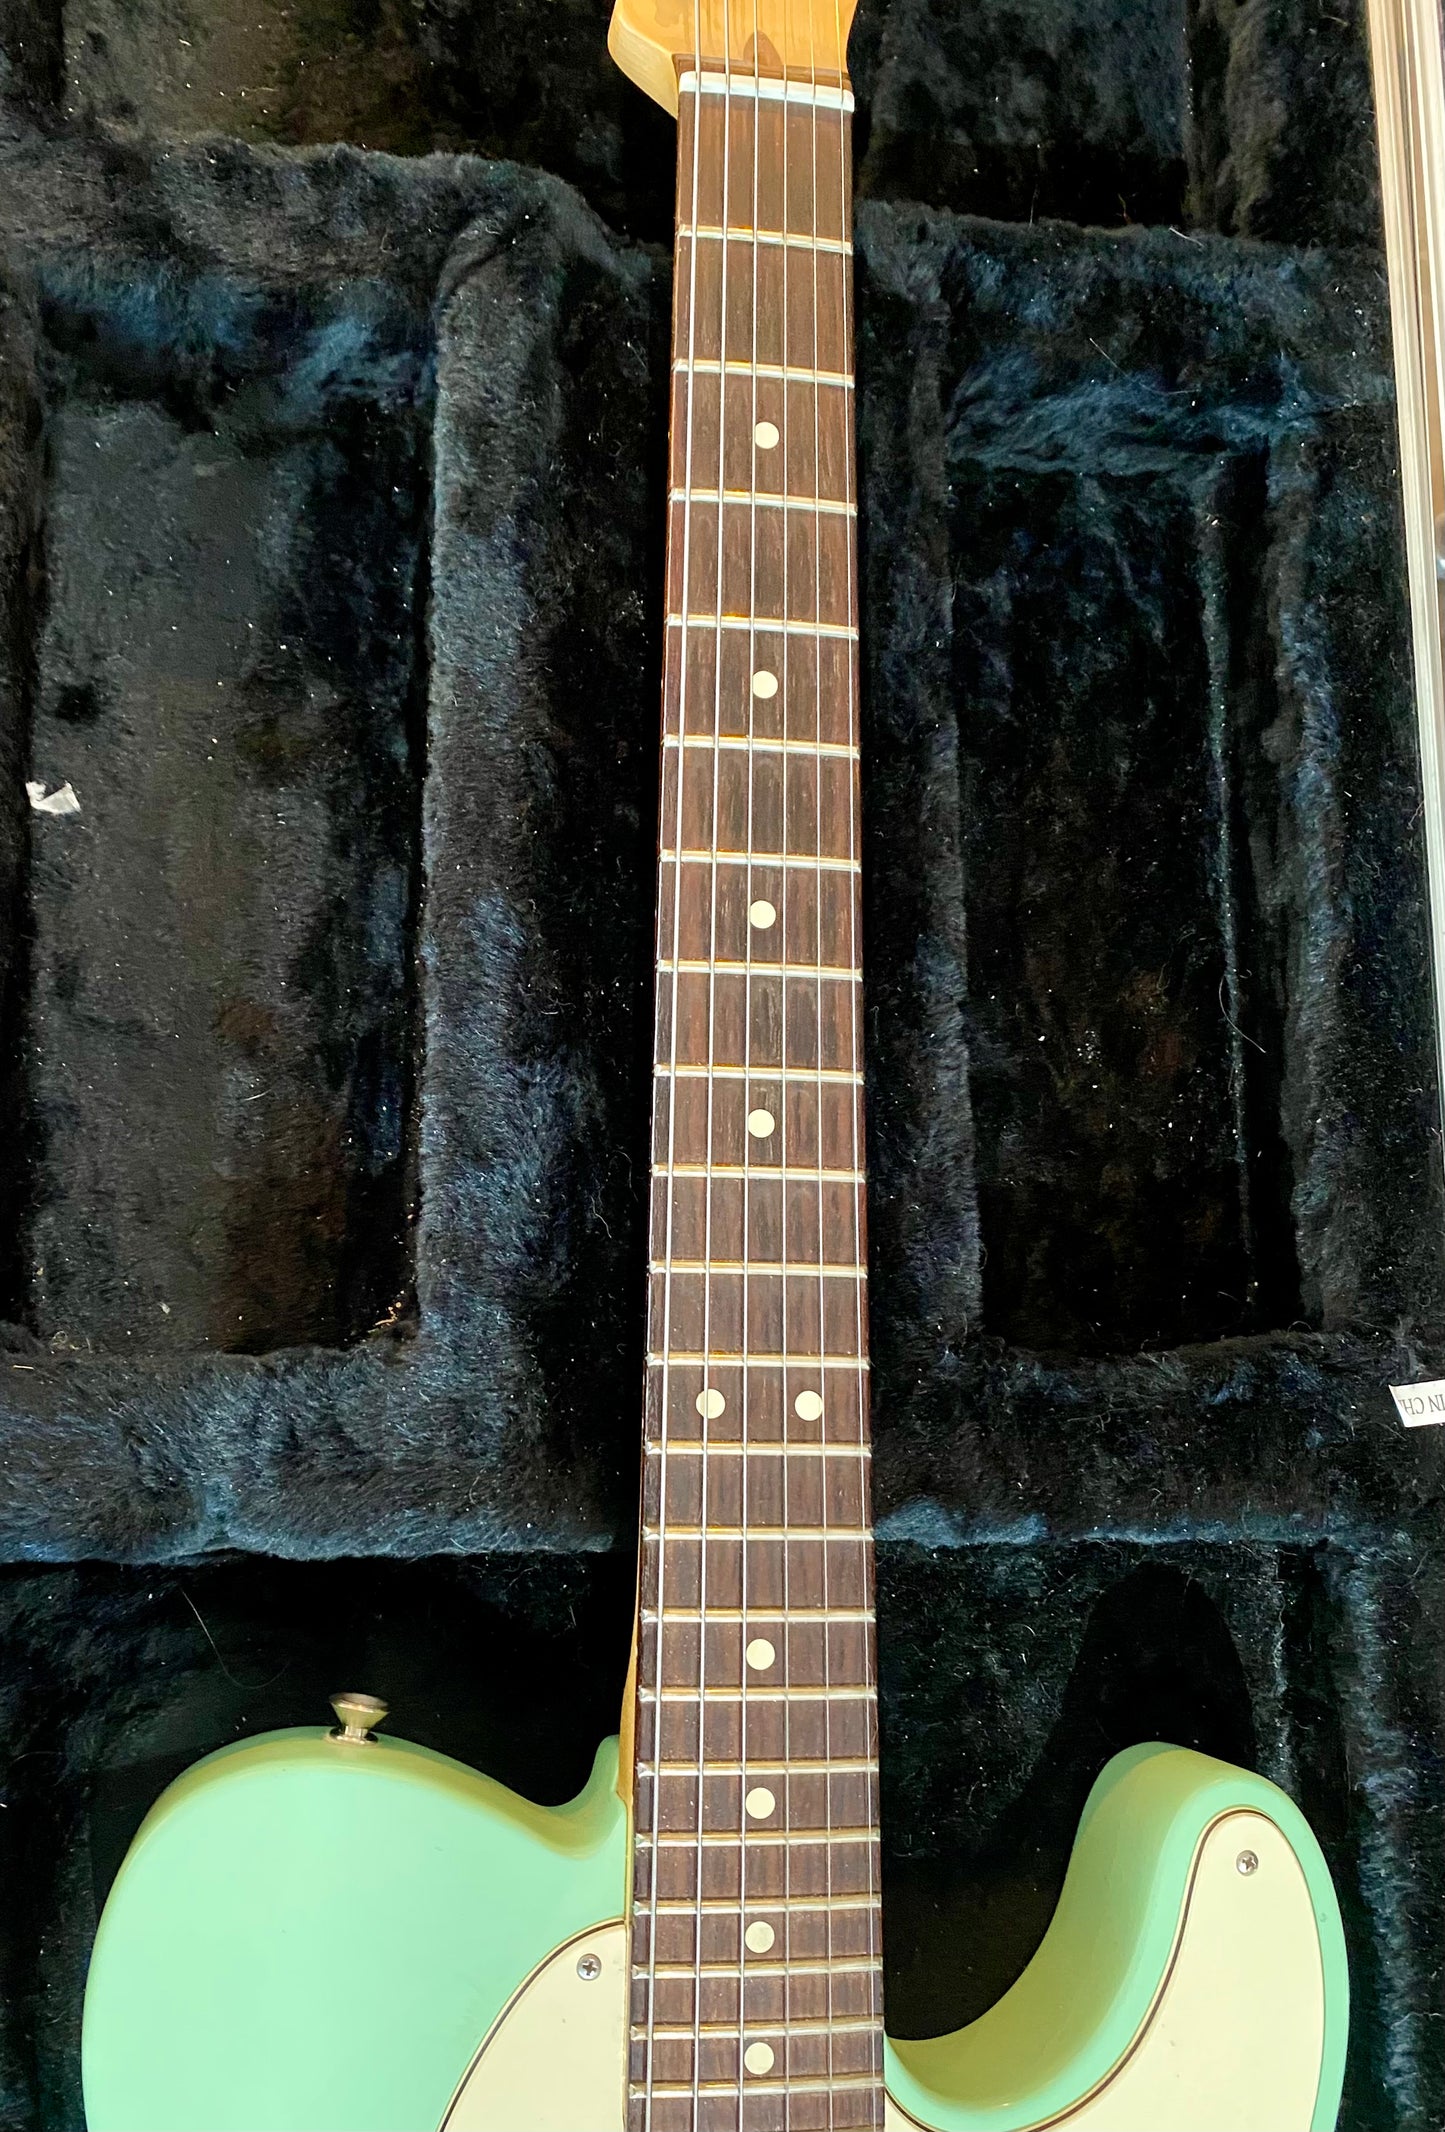 Fender American Performer, Humbucker, Rosewood, Telecaster Electric Guitar With Case - Satin Surf Green - Used